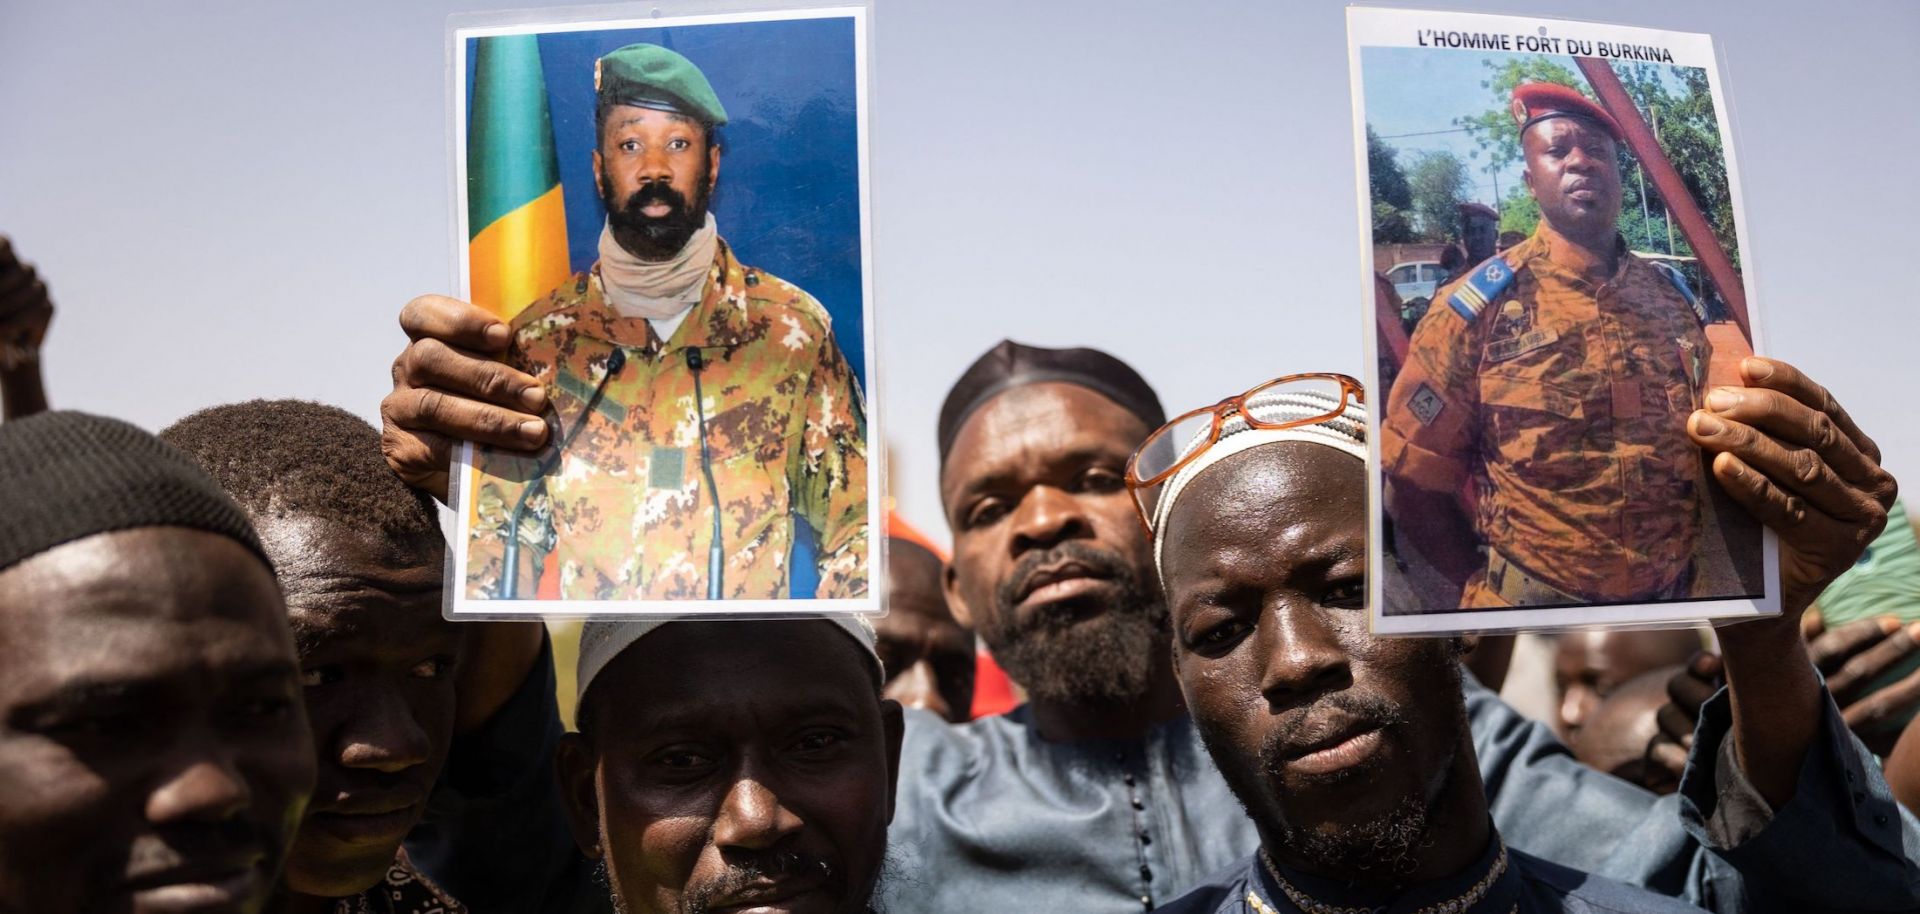 Demonstrators in Ouagadougou, Burkina Faso, hold up photos of Malian coup leader Assimi Goita (who seized power in Mali for the second time in a May 2021 coup) and Burkina Faso coup leader Paul-Henri Sandaogo Damiba on Jan. 25, 2022.